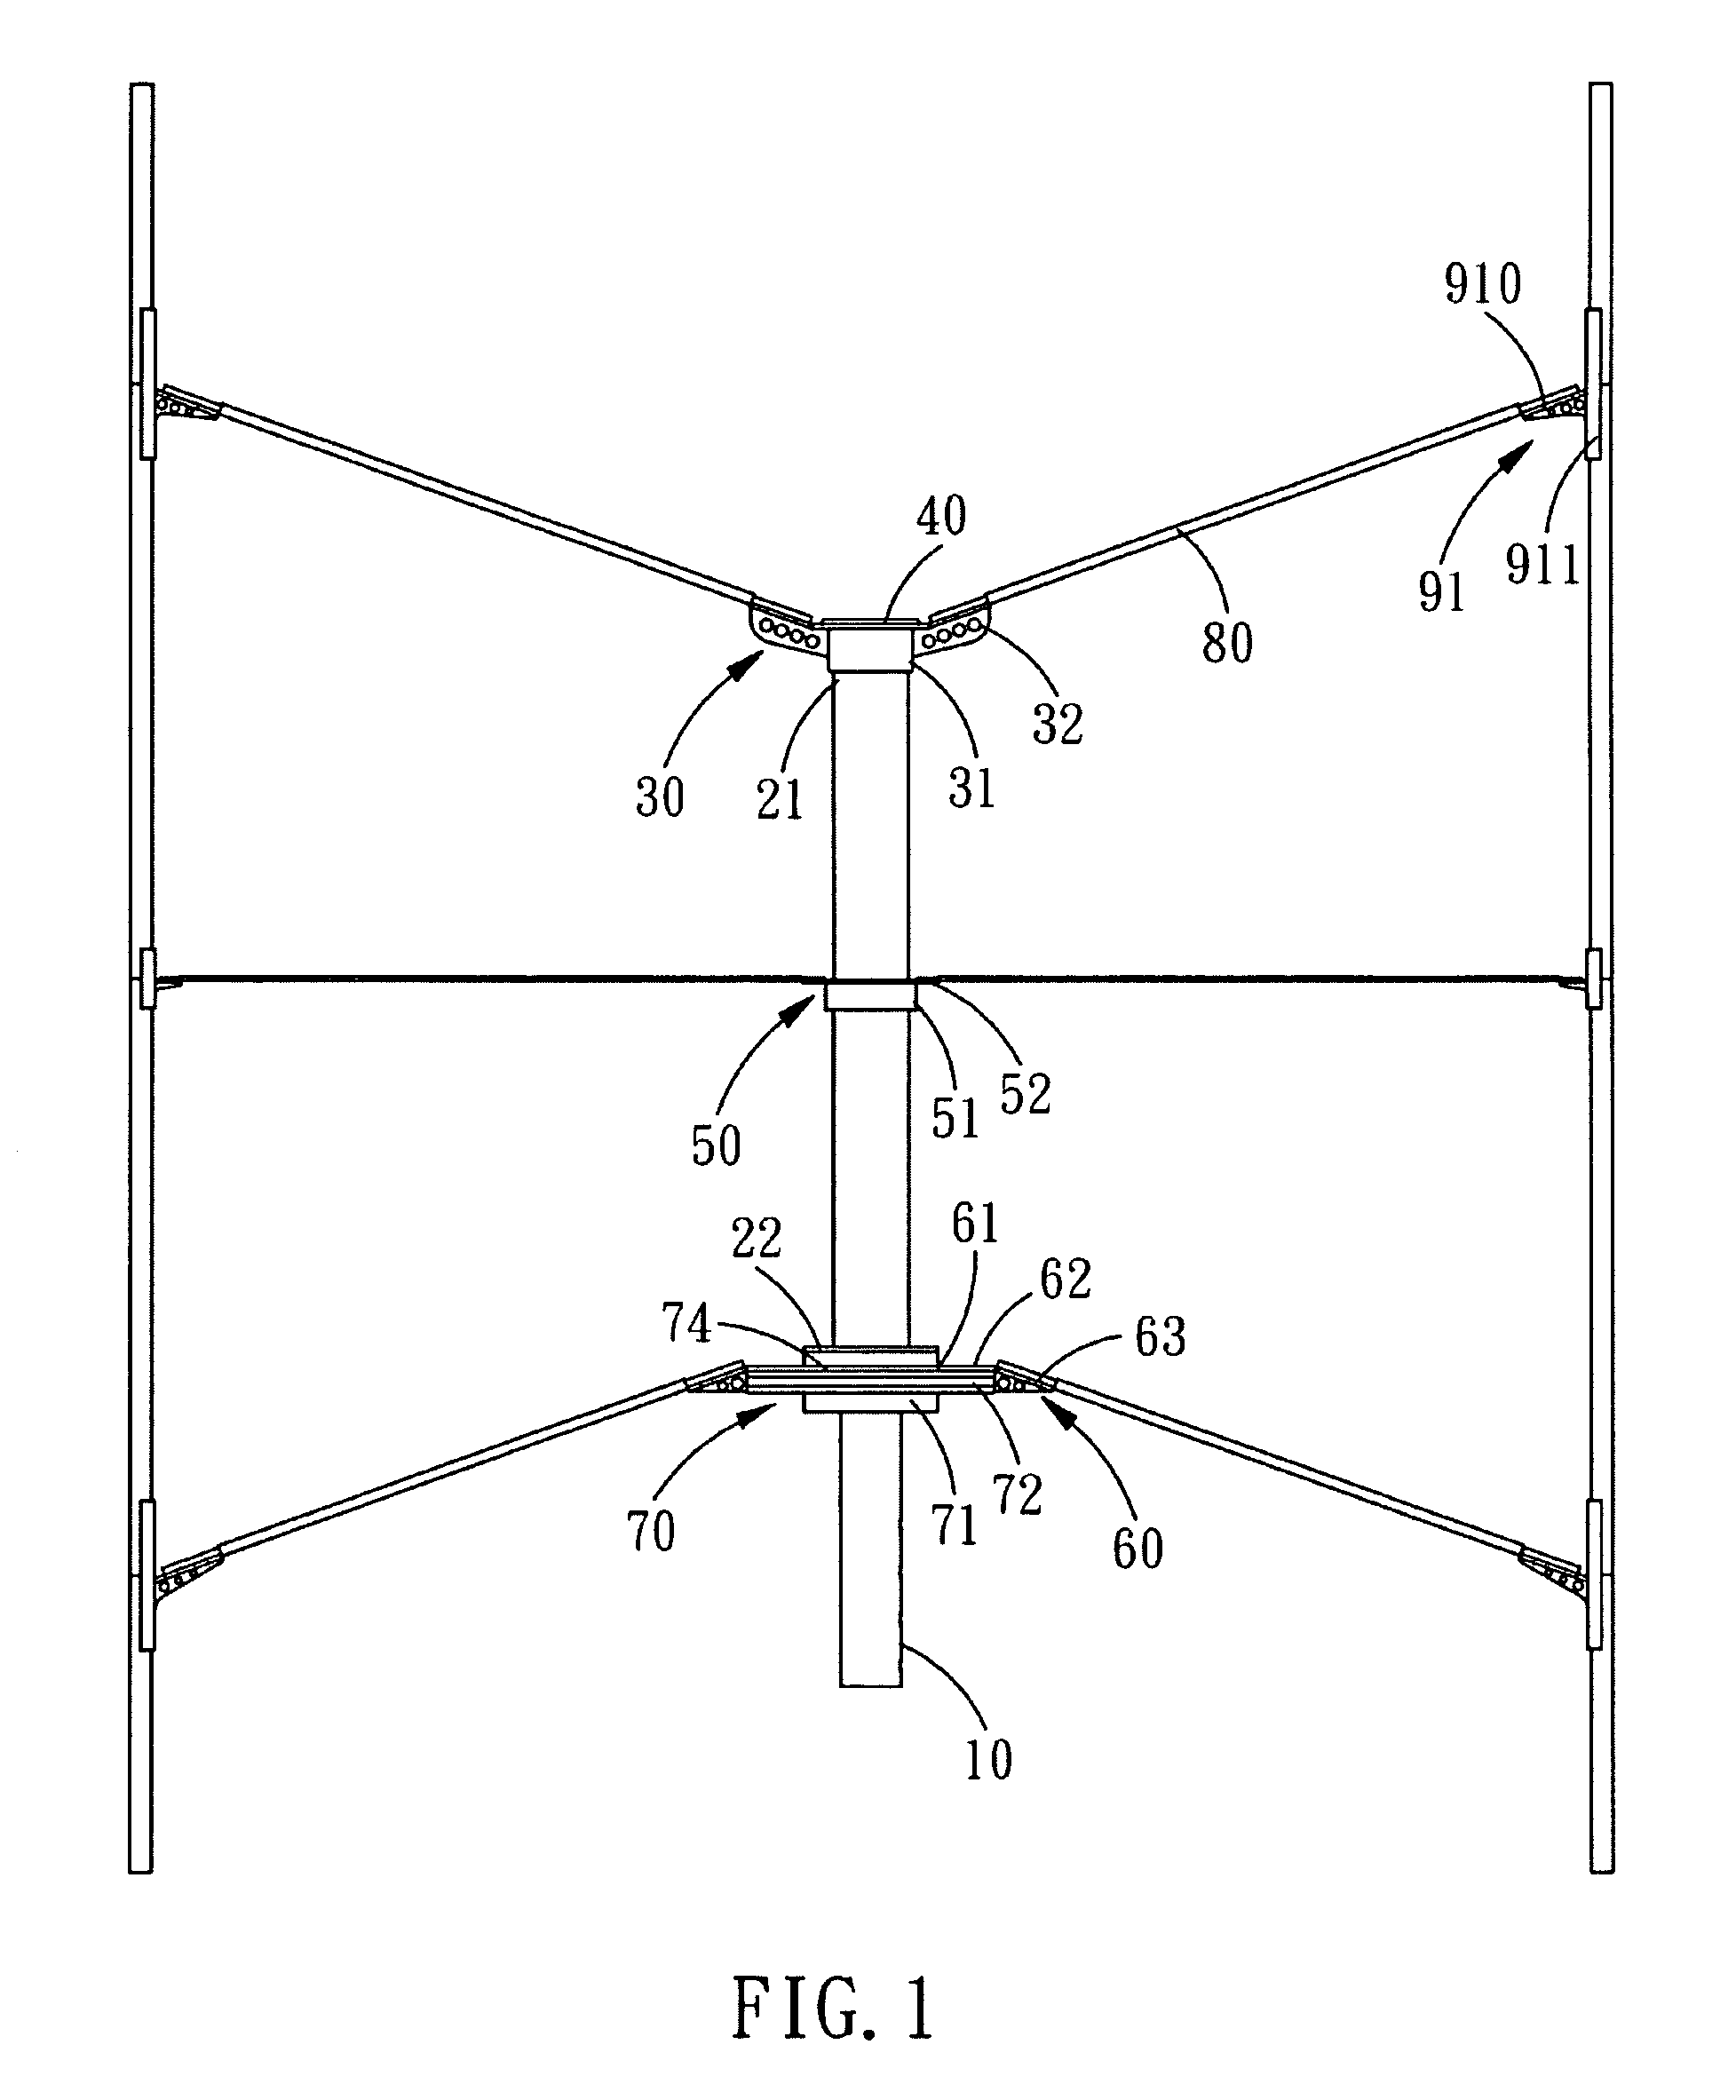 H-shaped Vertical Axis Type Windmill Structure